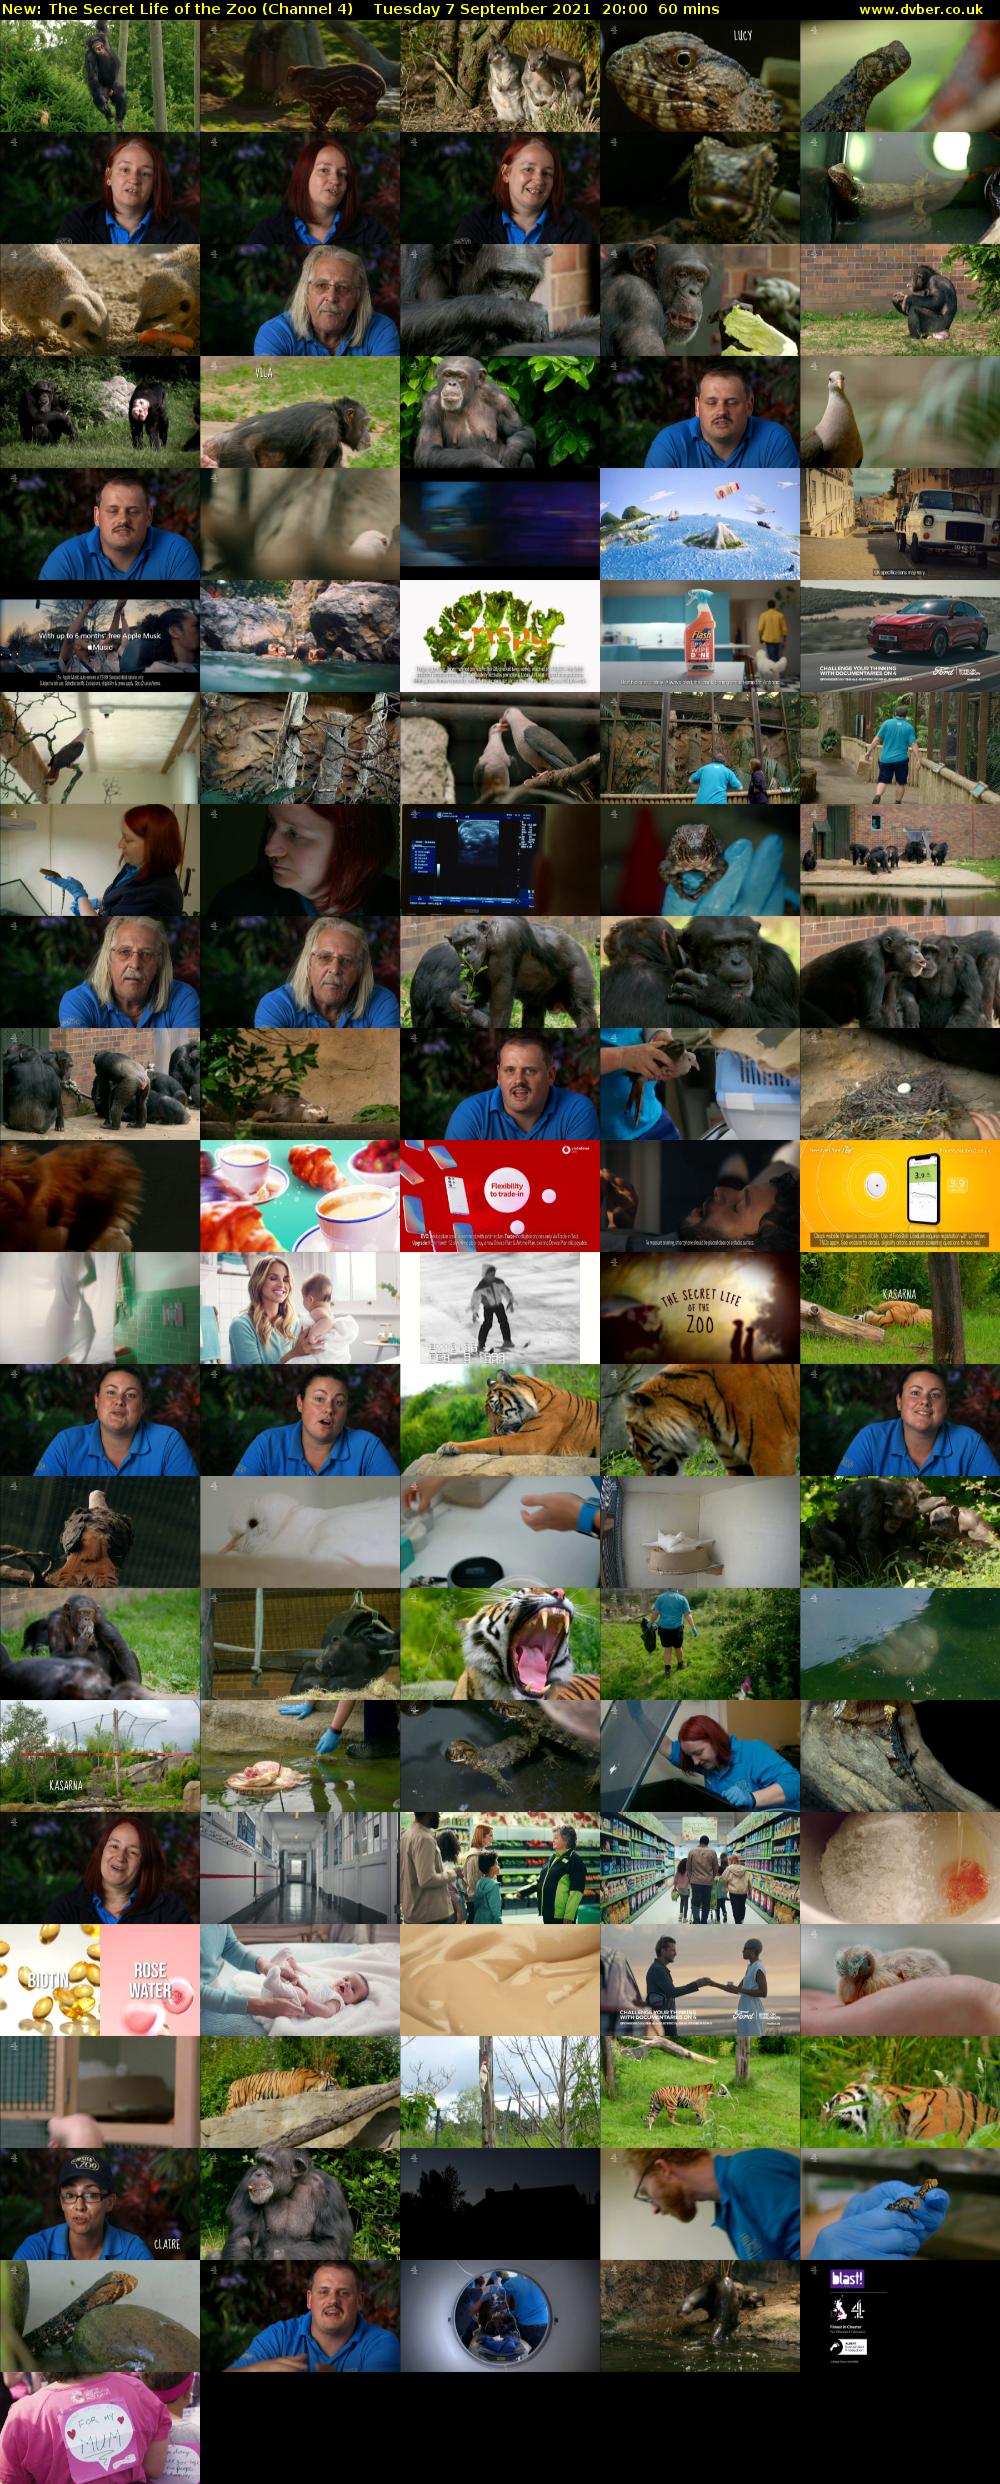 The Secret Life of the Zoo (Channel 4) Tuesday 7 September 2021 20:00 - 21:00